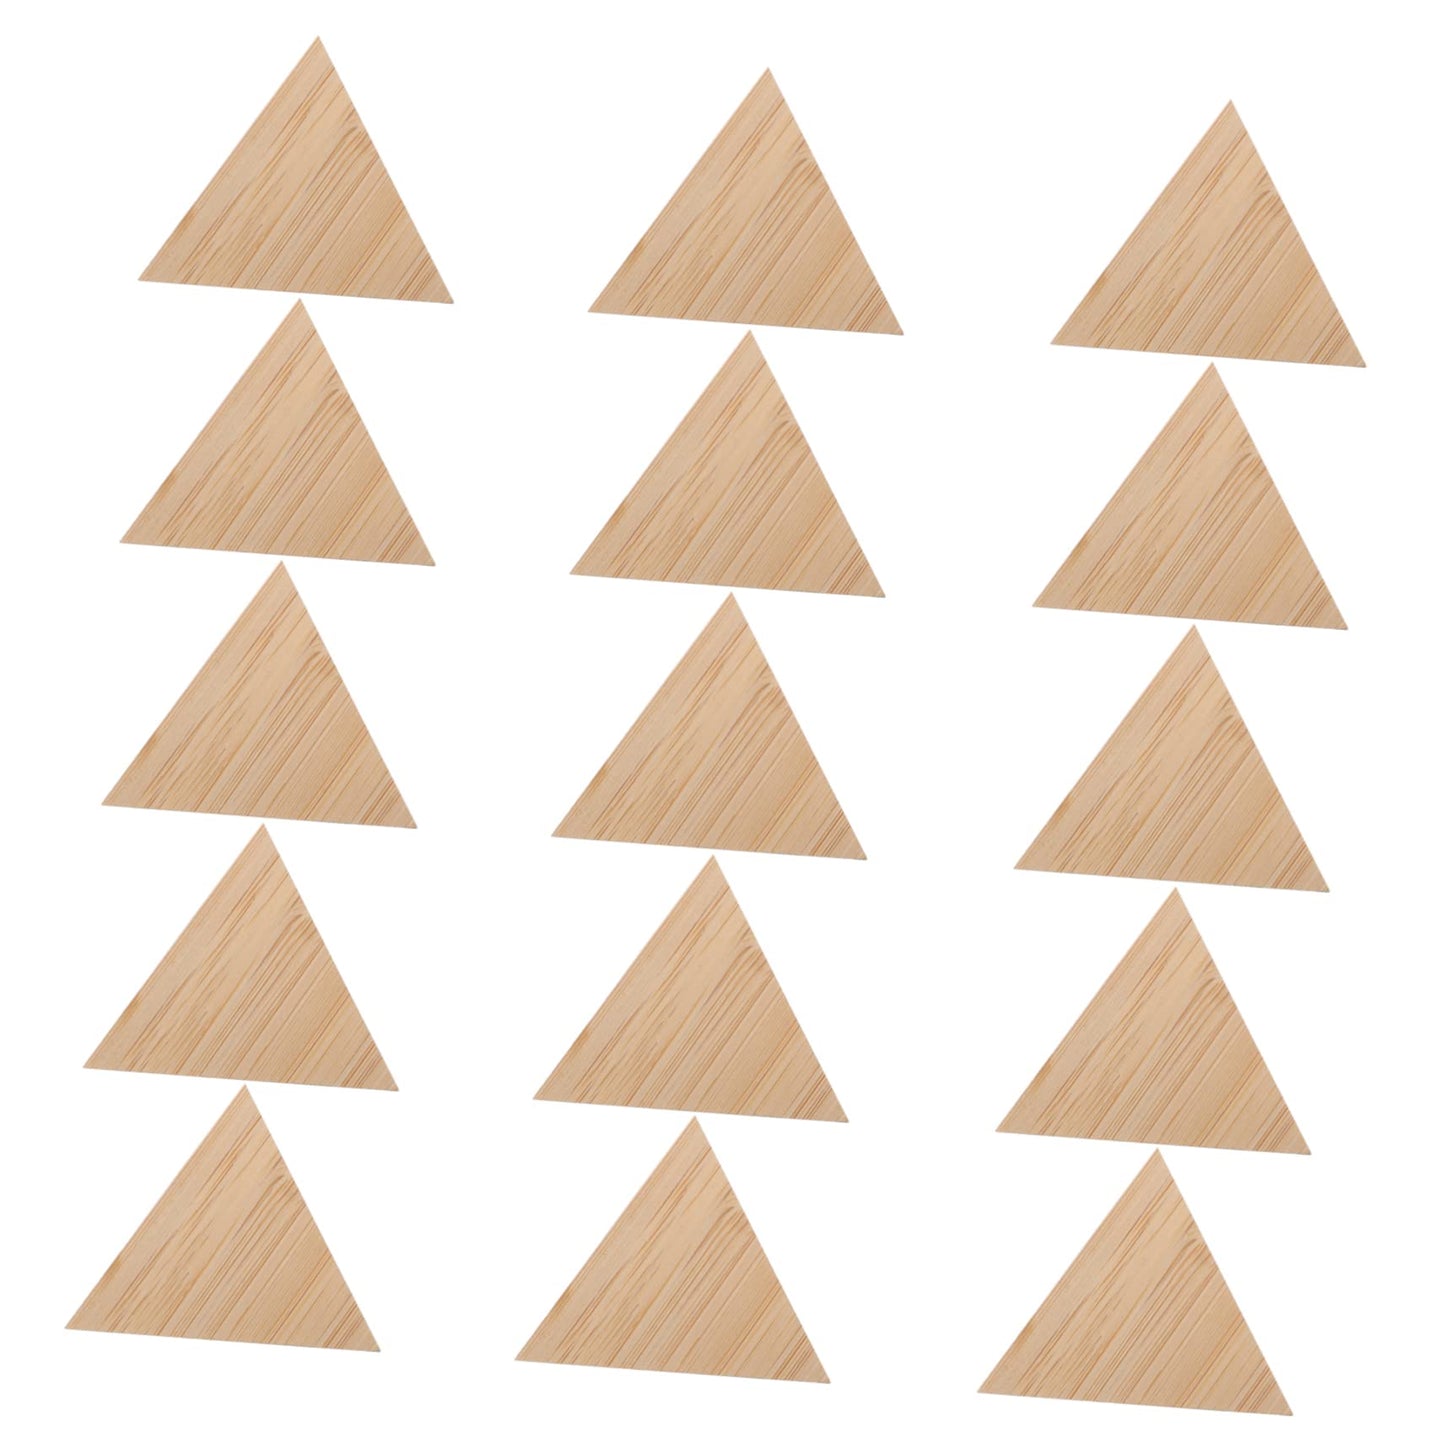 MAGICLULU 15pcs DIY Hand Painting Wood Cutout Shapes Unfinished Wood Chip Crafts Blank Wood Gift Tags Ornament for Kids Wood Log Slices Ornaments for